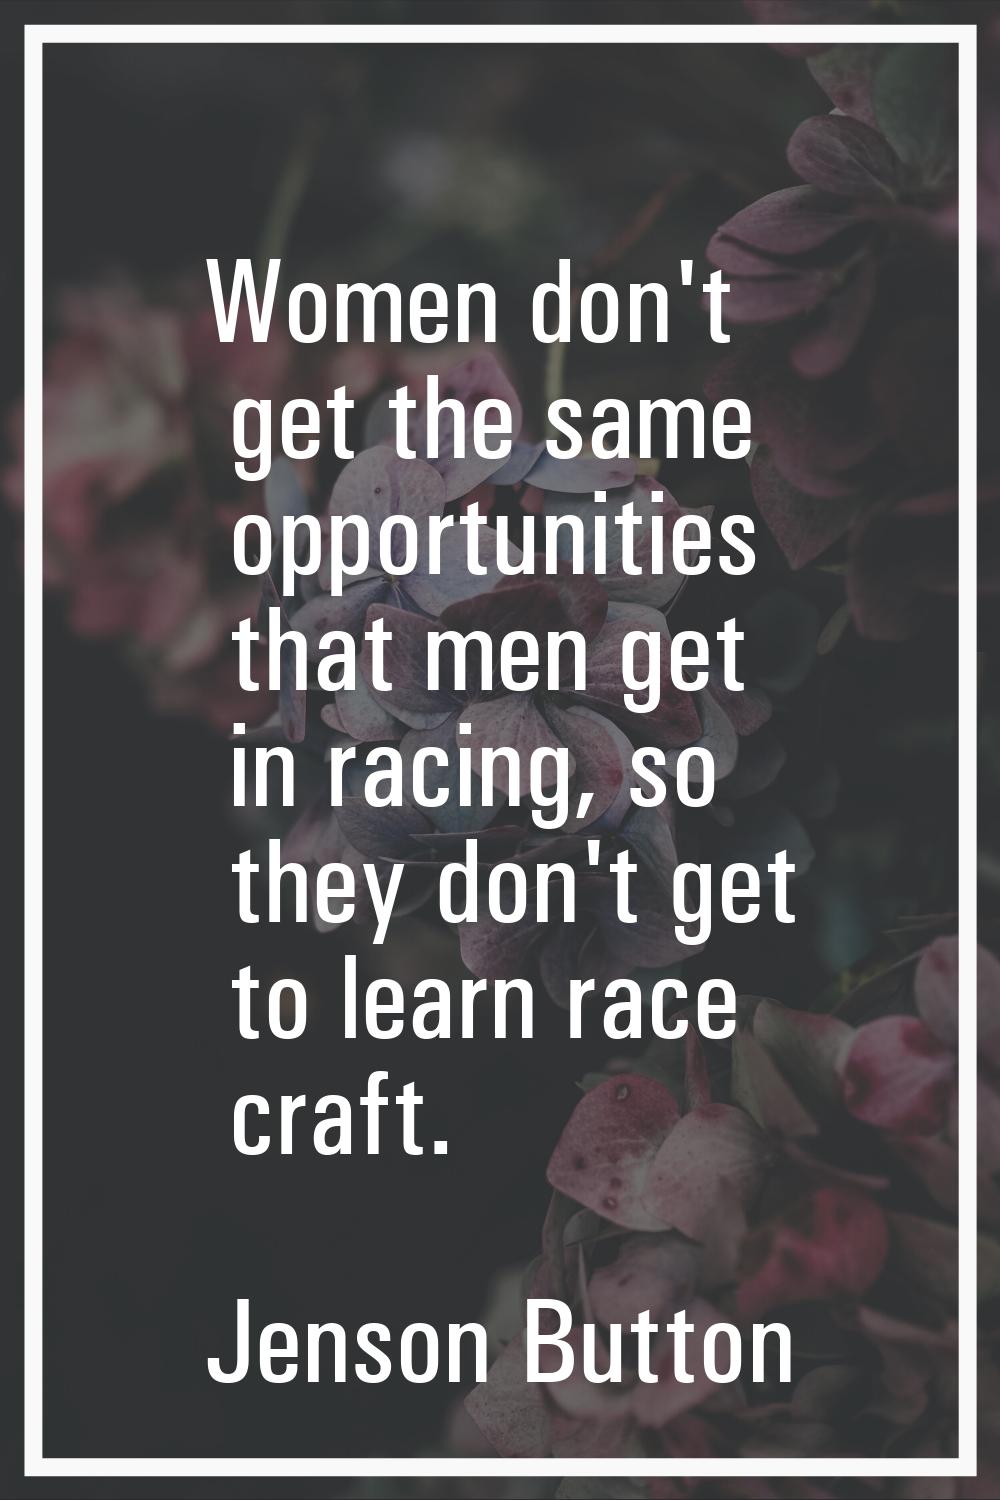 Women don't get the same opportunities that men get in racing, so they don't get to learn race craf